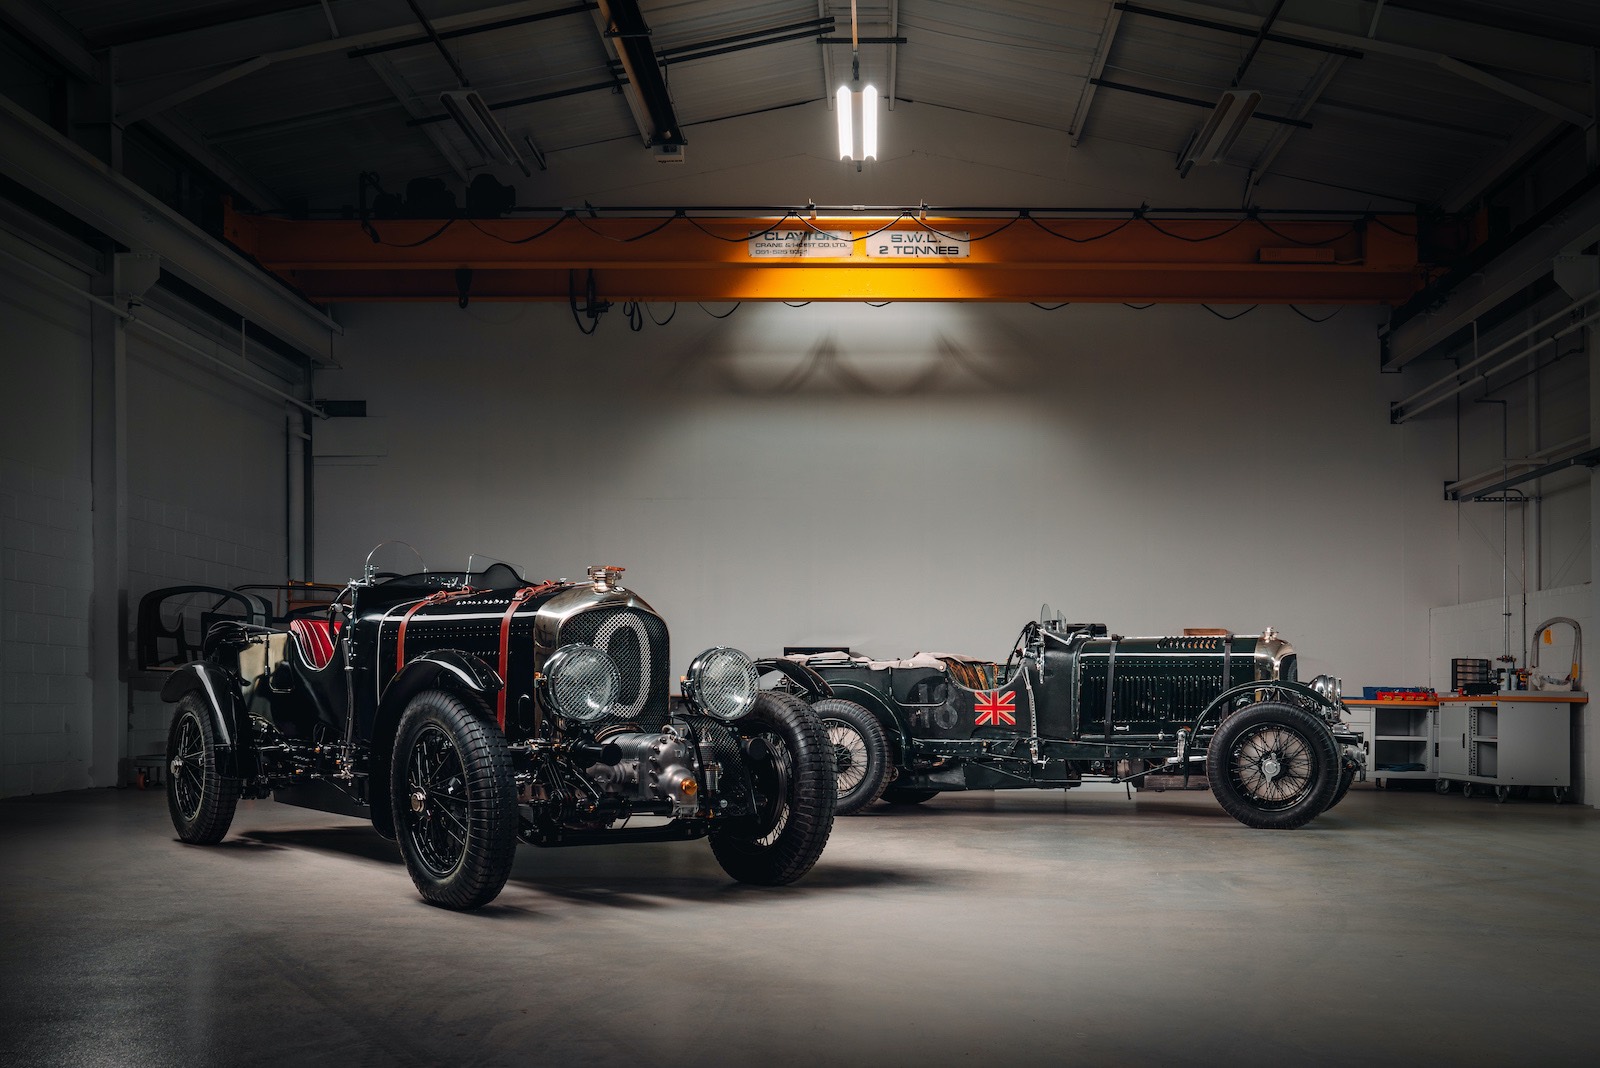 Car Zero makes debut as first new Bentley Blower since 1930